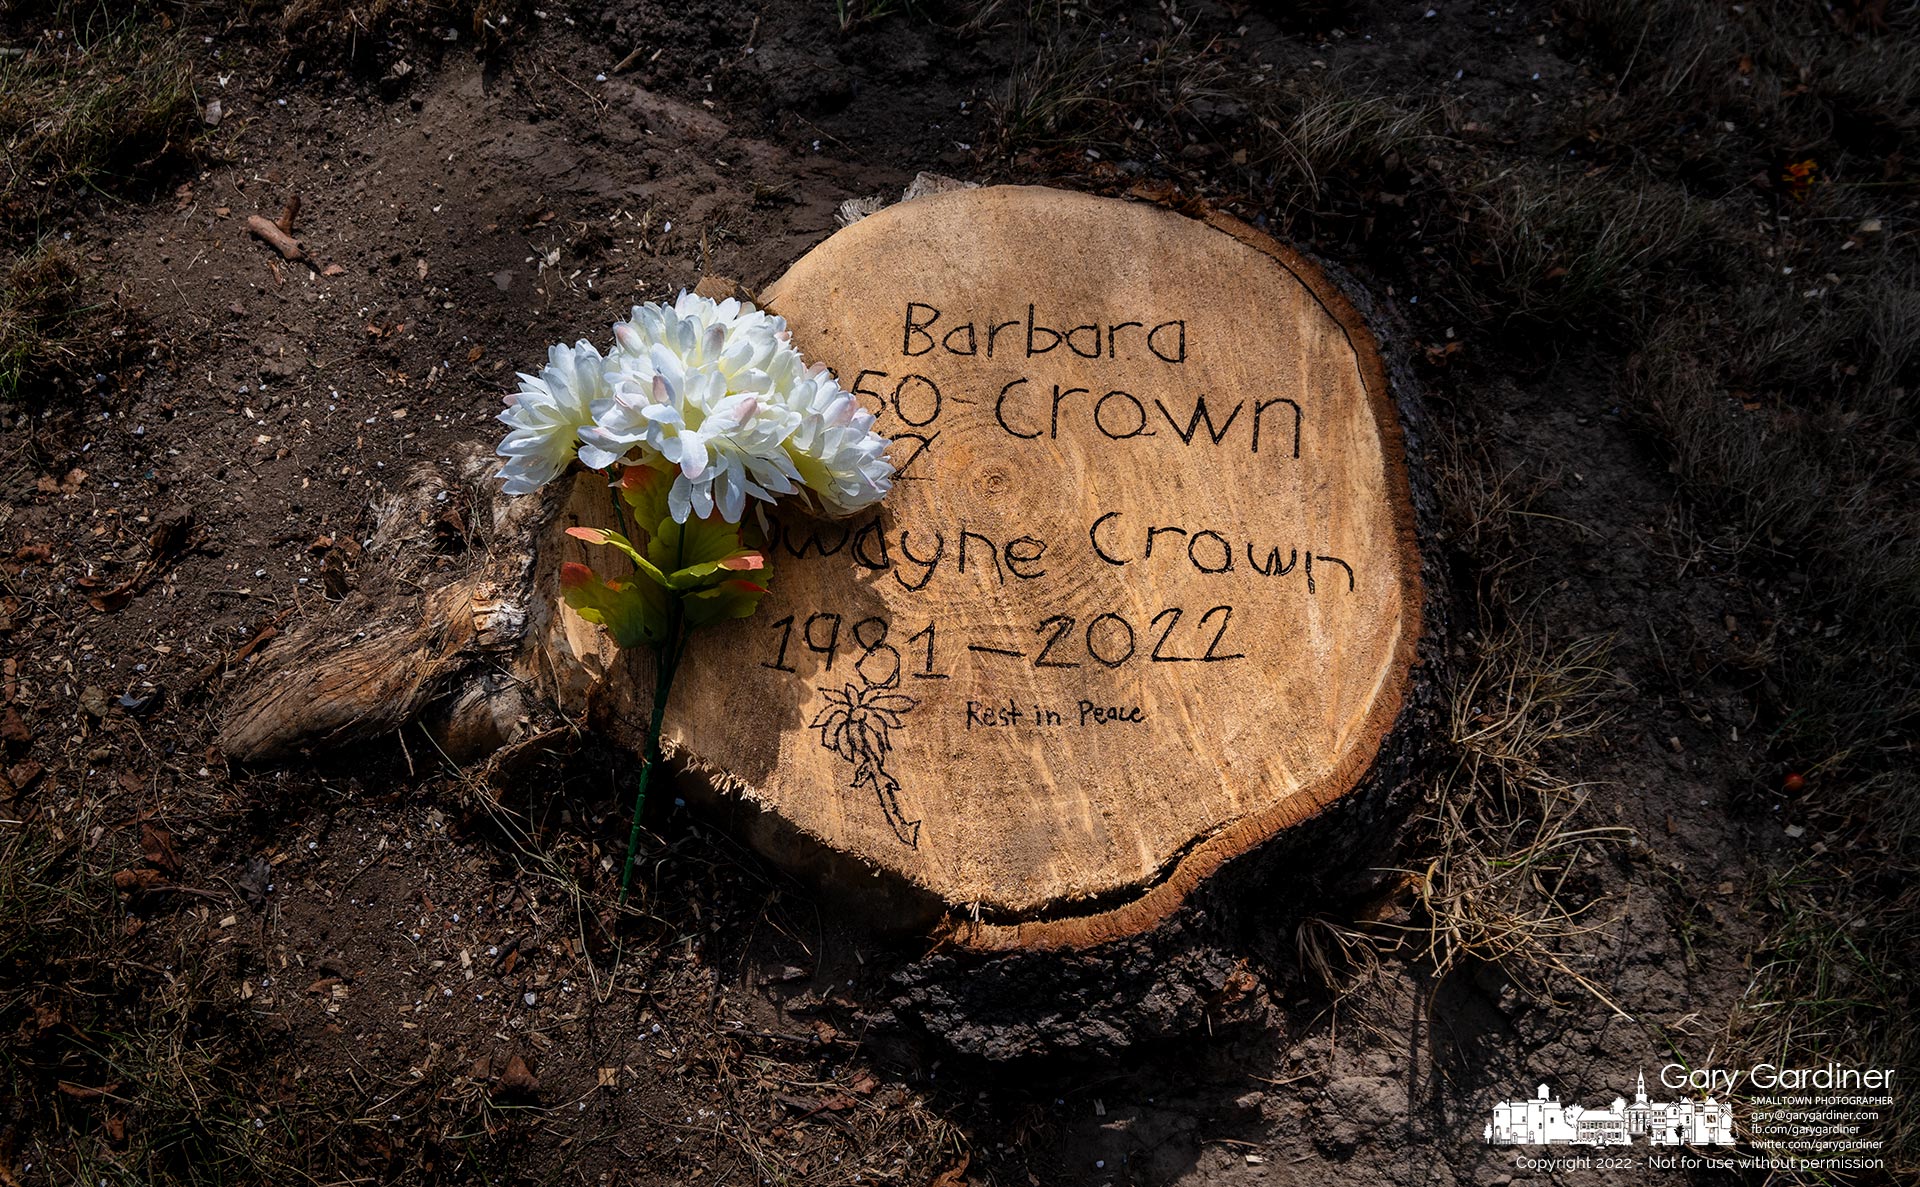 A small bouquet of flowers sits on the stump of a tree with a hand-carved memorial etched into it for a mother and son who died when their car hit the tree on Liberty Lane. My Final Photo for Sept. 2, 2022.